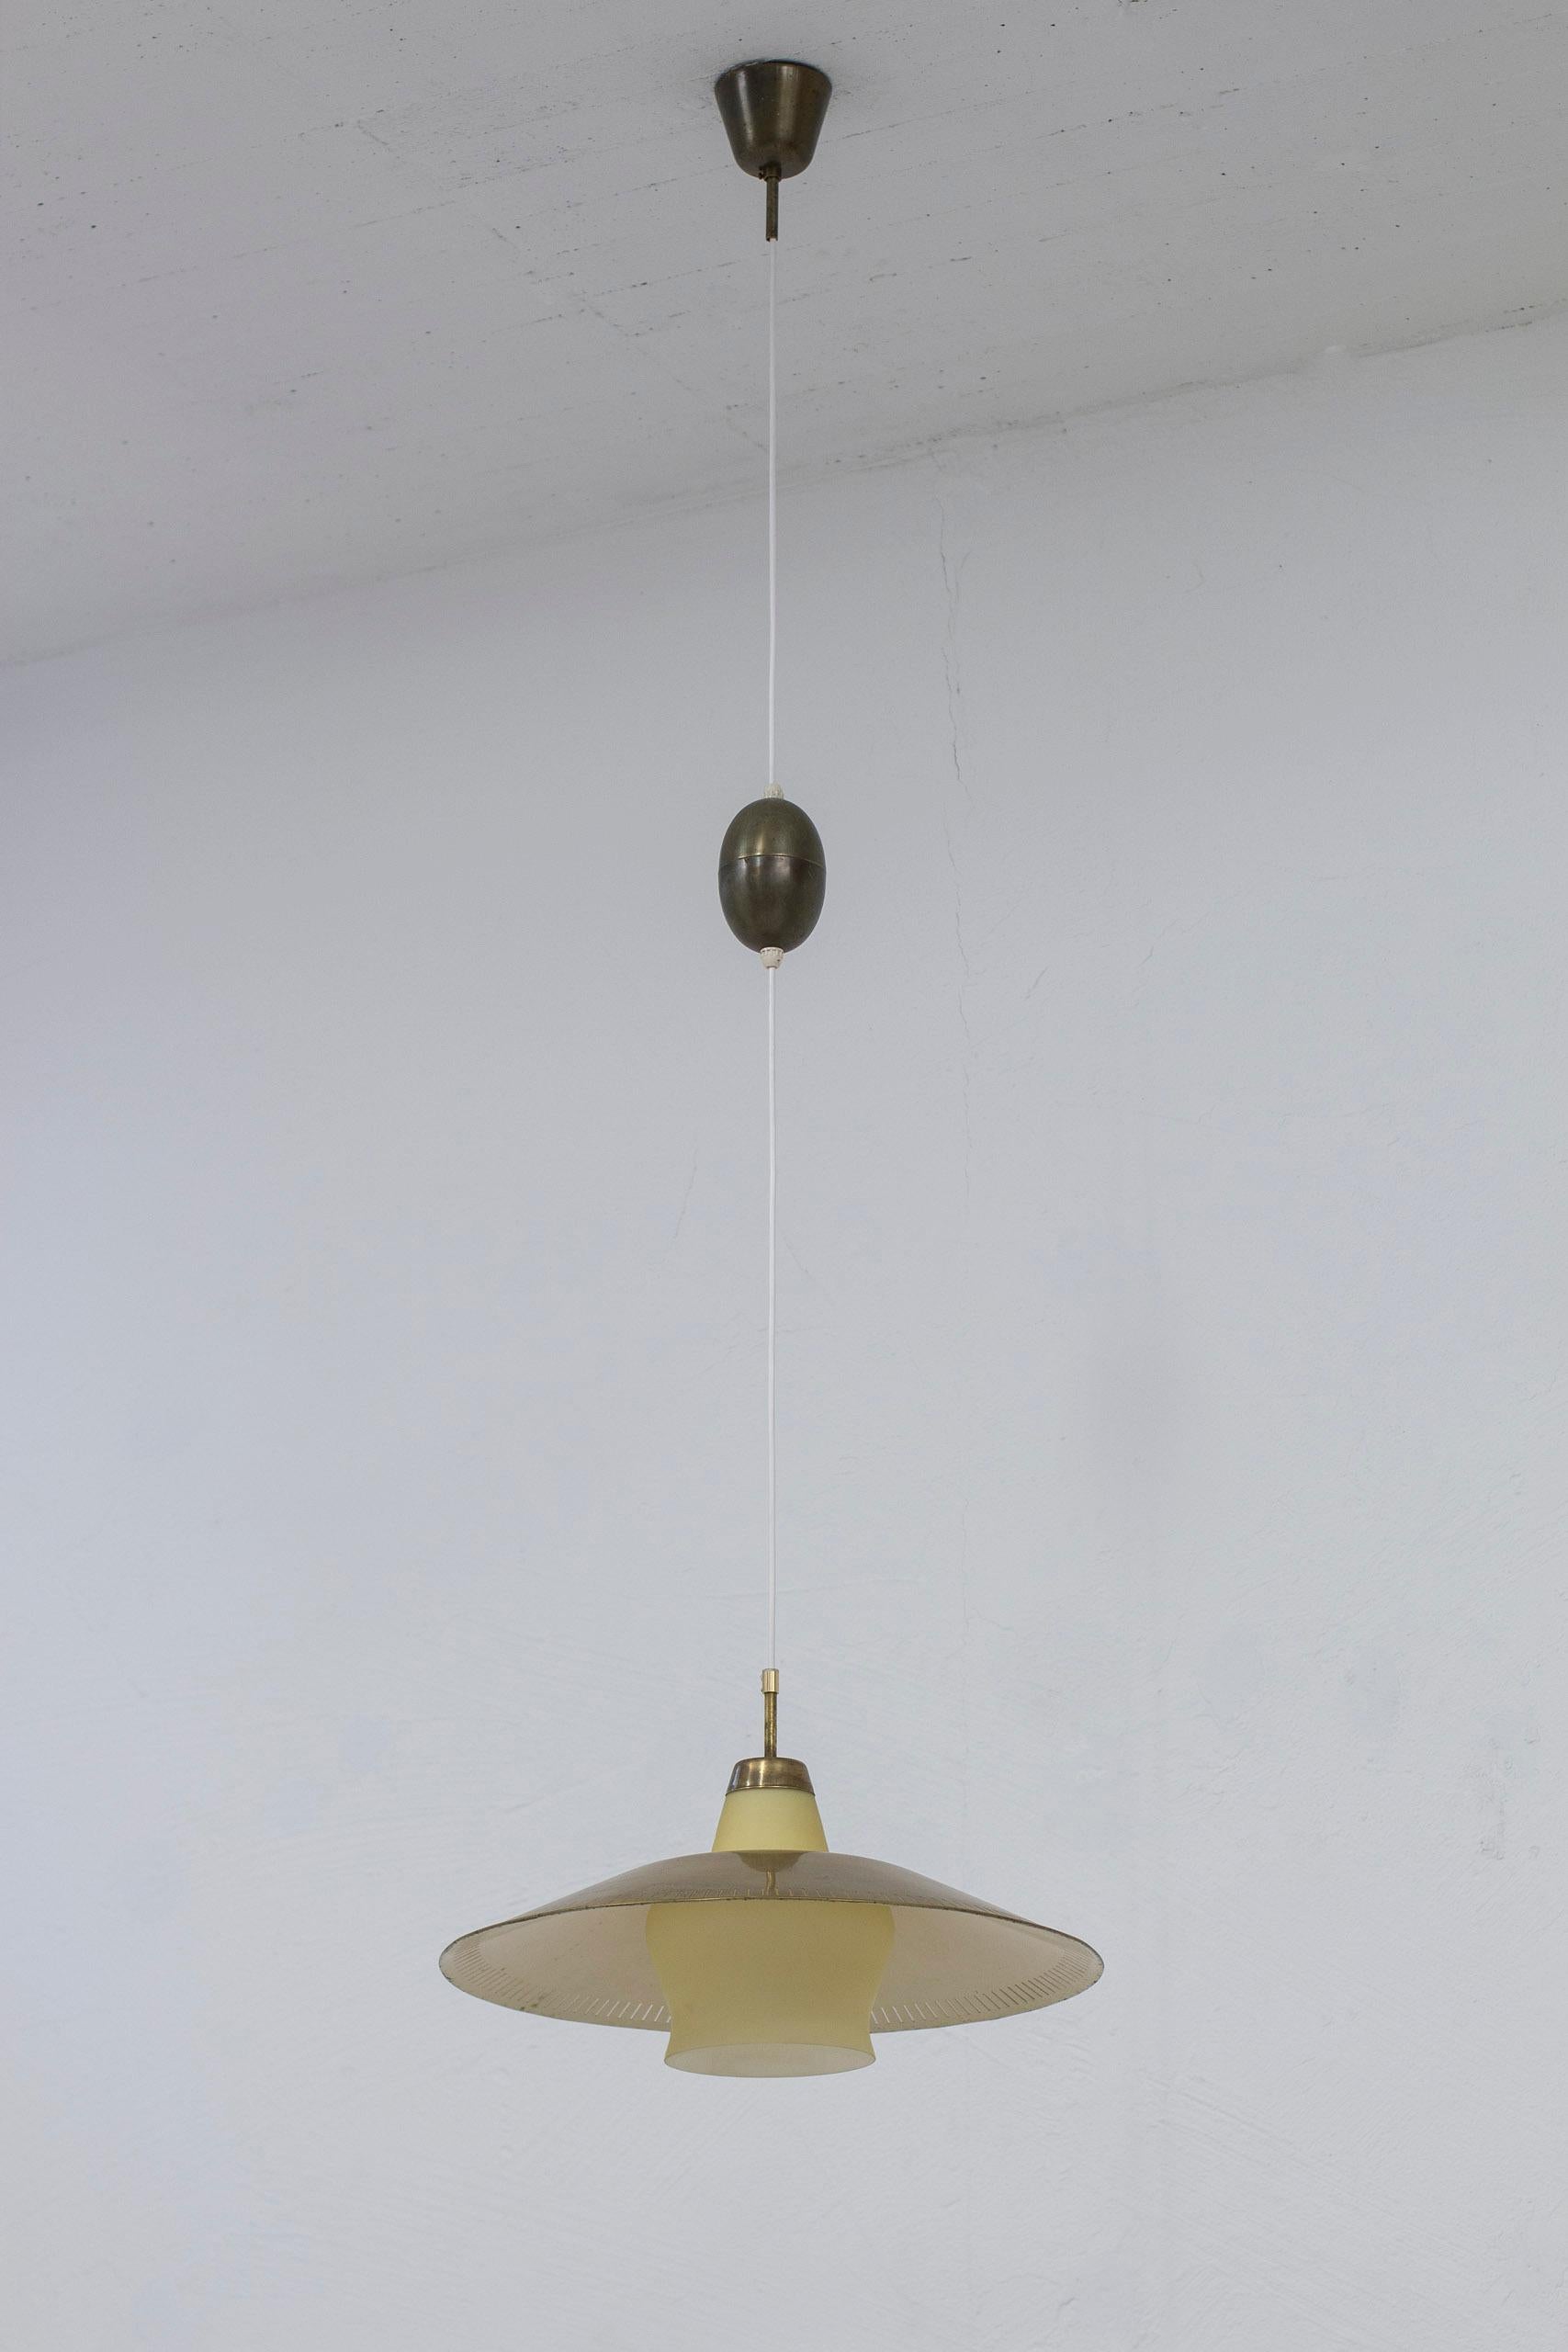 Ceiling pendant light designed by Harald Notini. Produced in Stockholm, Sweden by Arvid Böhlmarks lampfabrik during the 1940s. Light yellow opal glass with large brass shade. Brass extension 